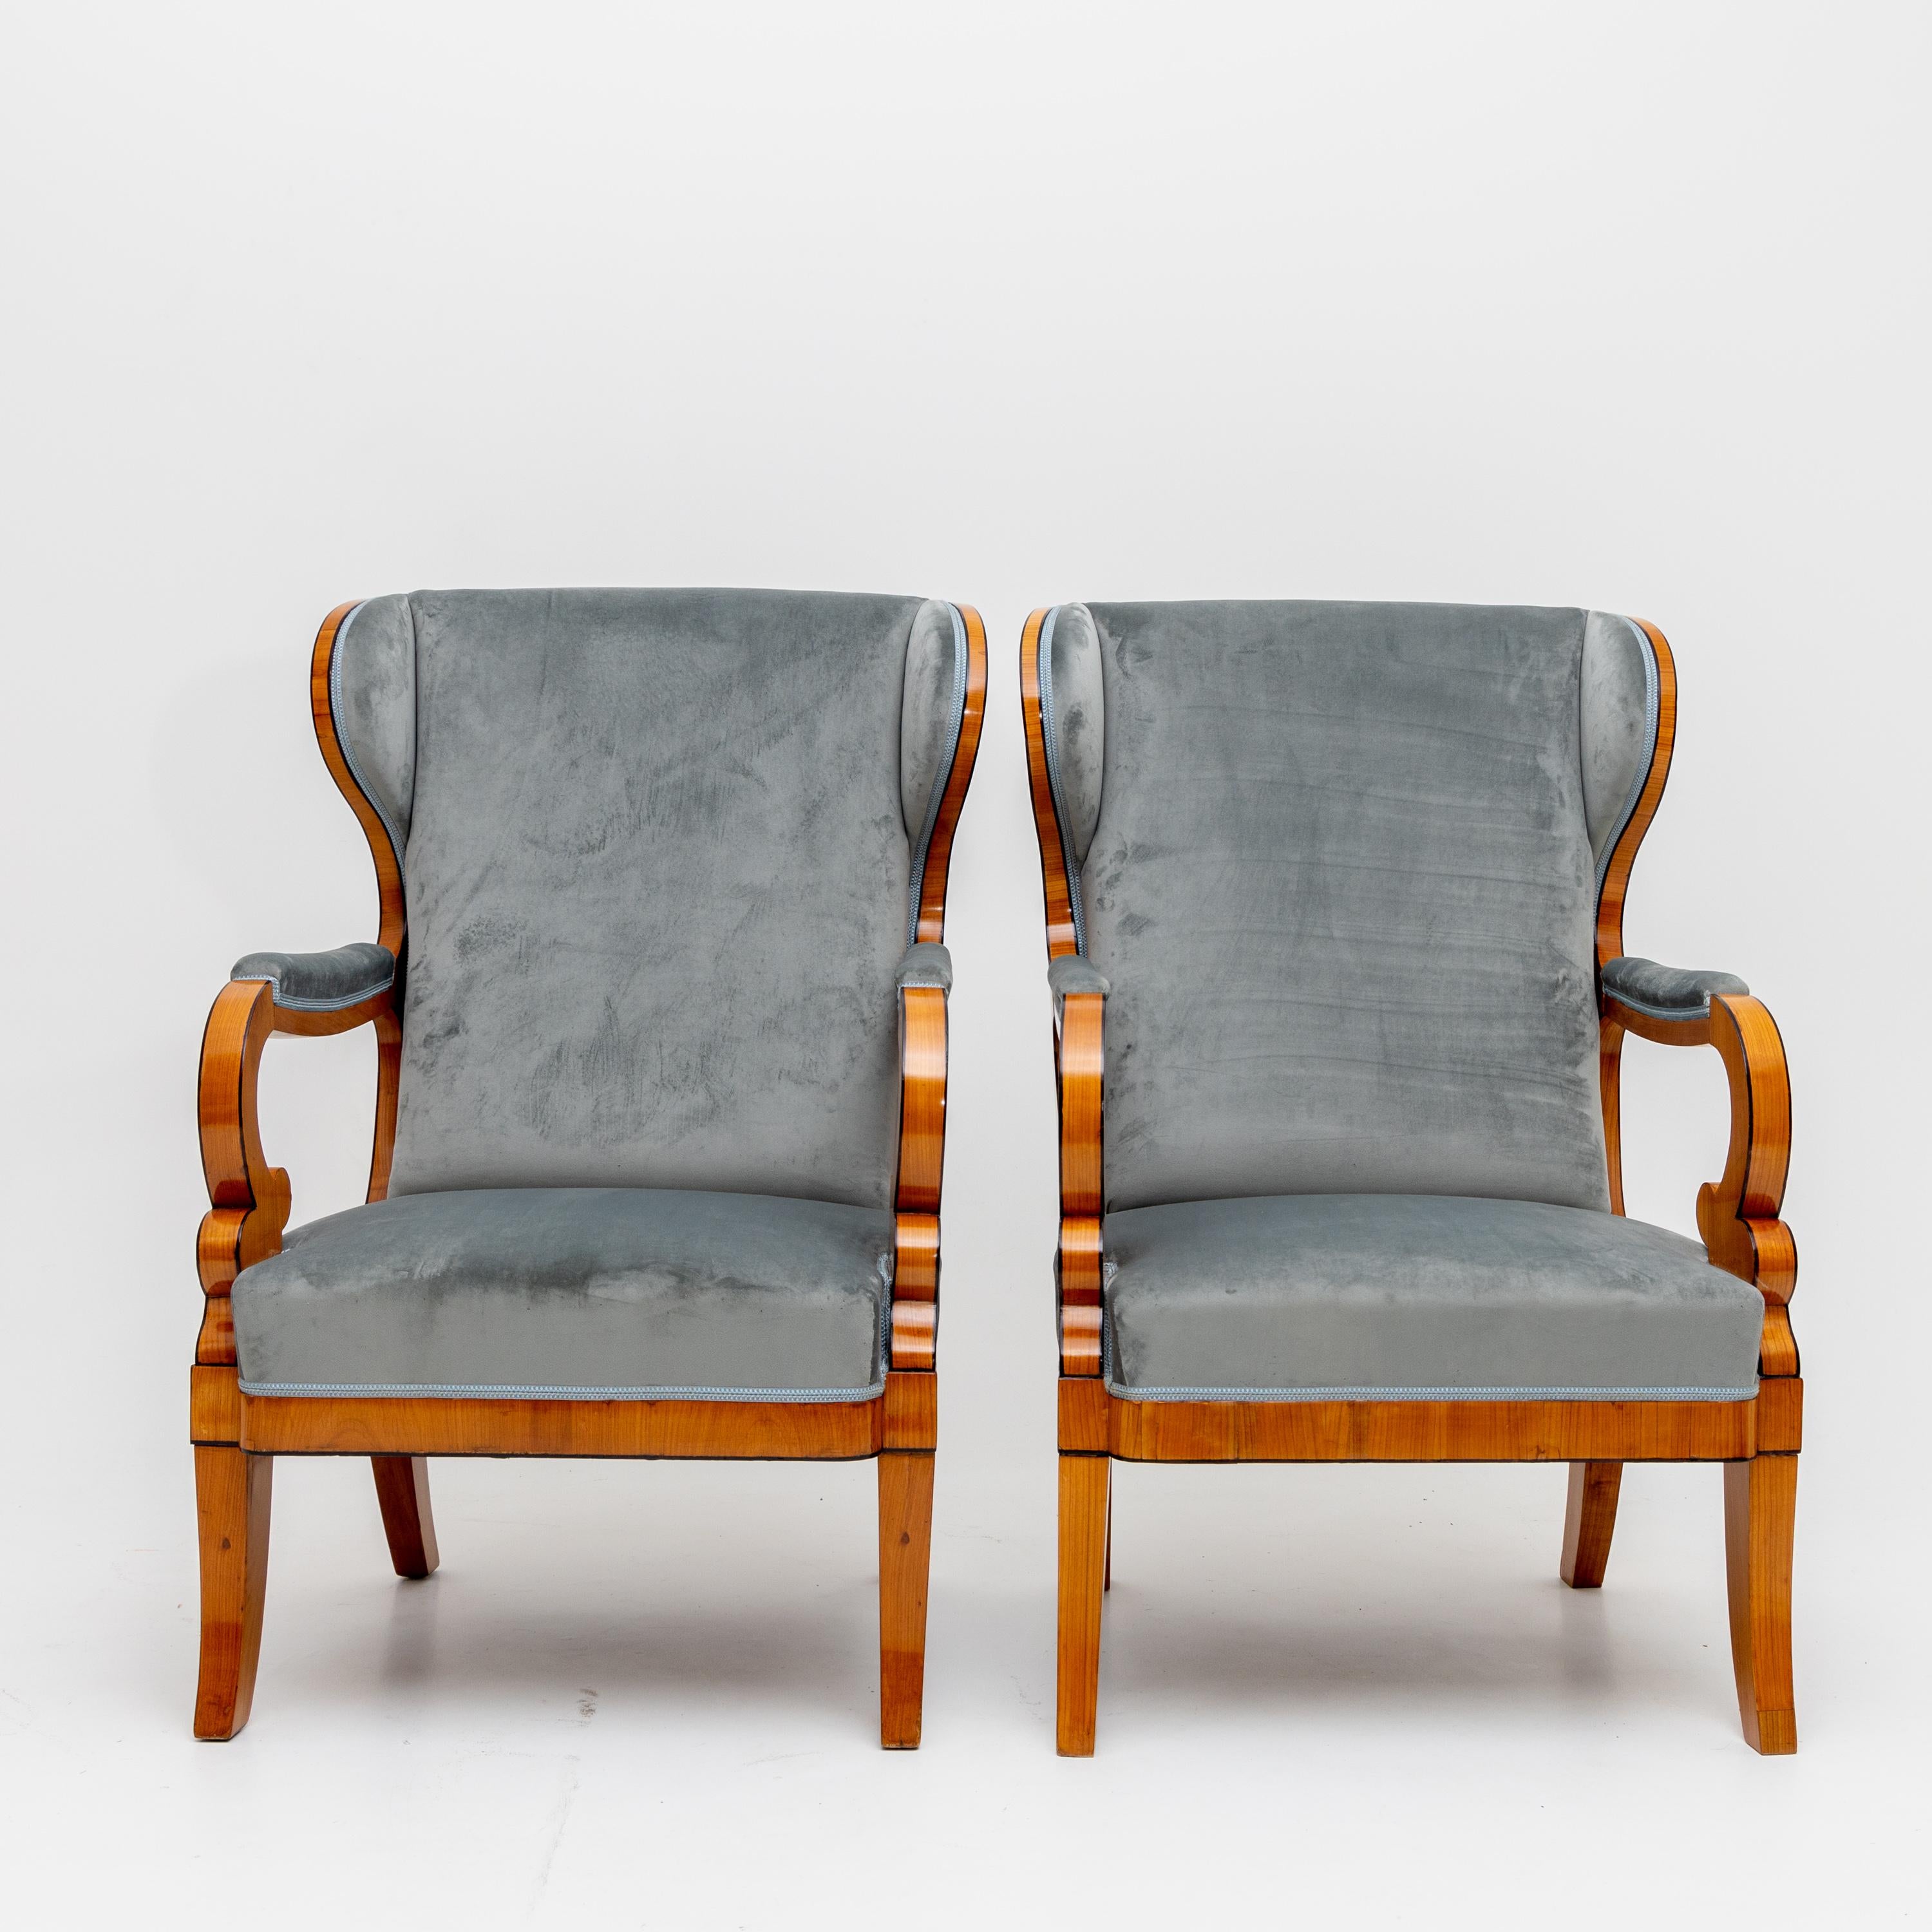 Textile Pair of Wingback Chairs, c. 1830 For Sale